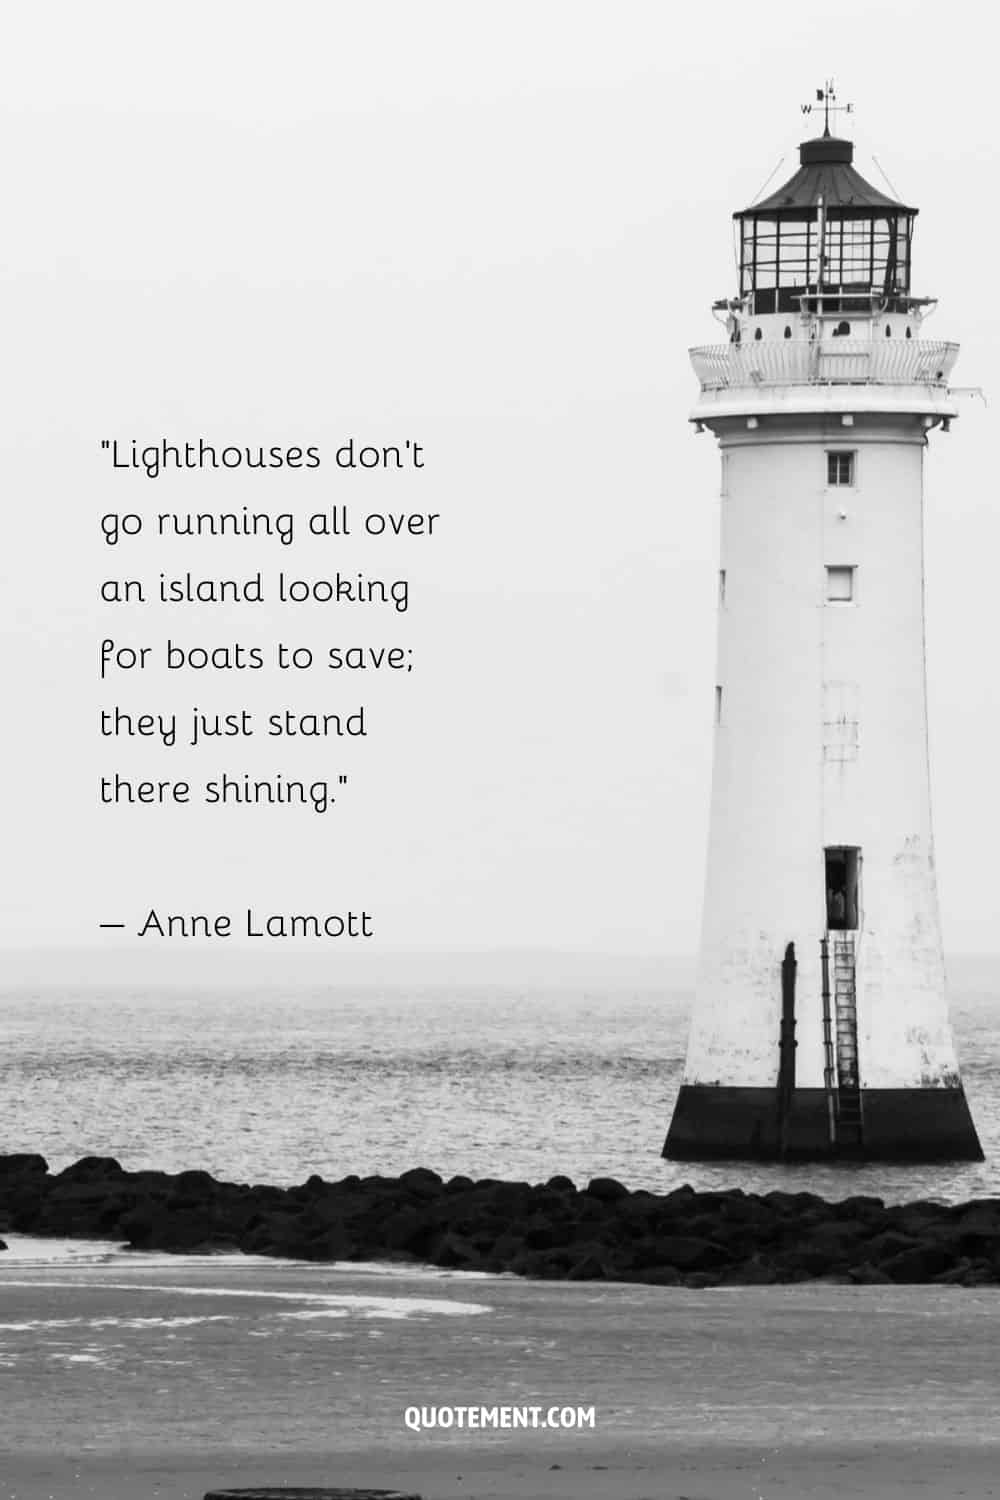 Deep quote on lighthouses by Anne Lamott and a lighthouse in black and white